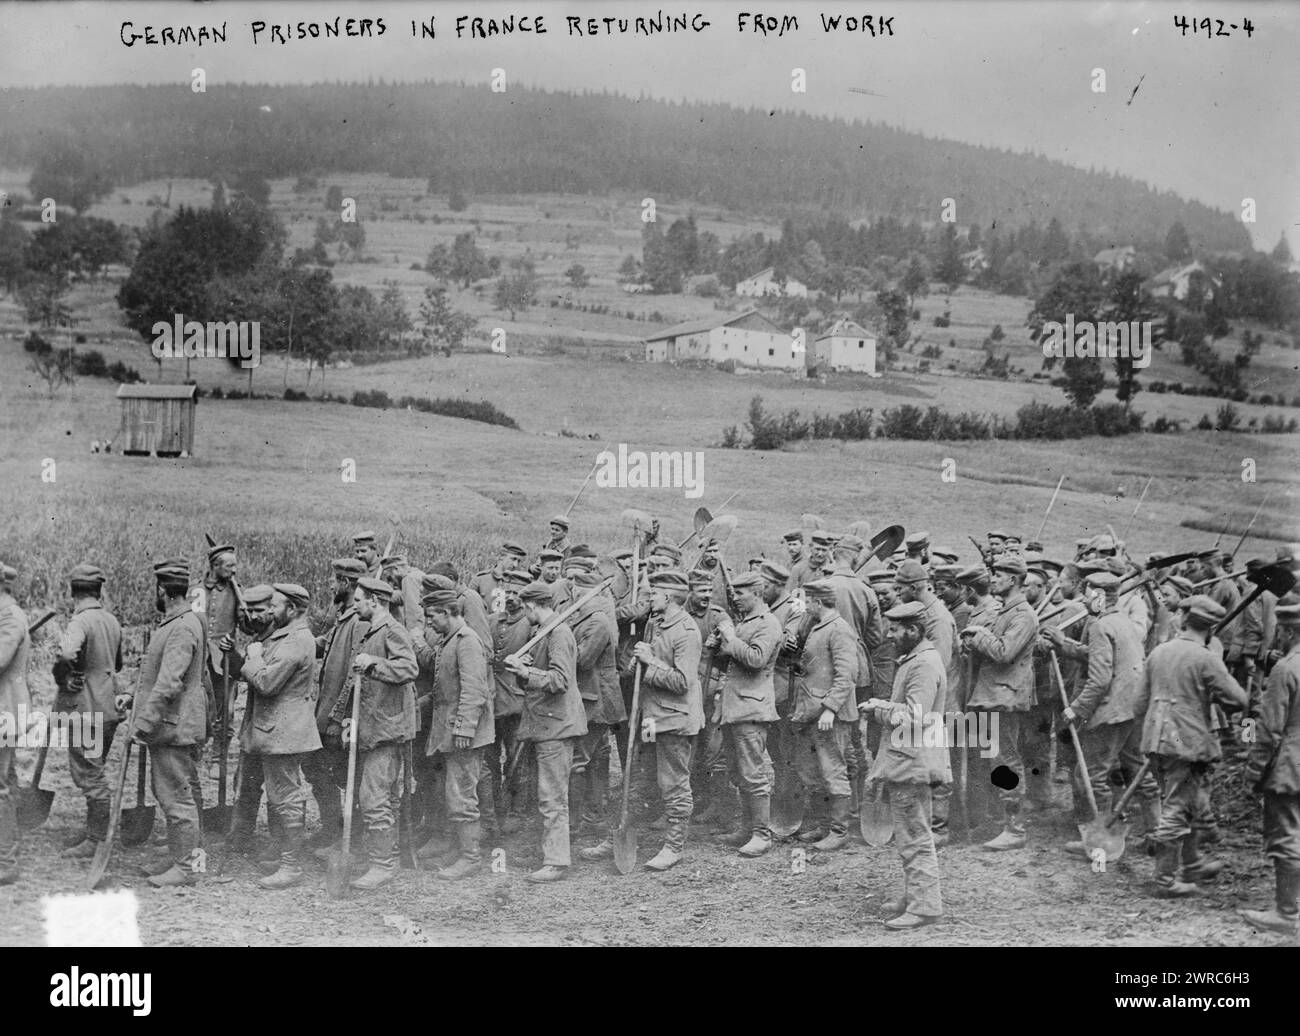 German prisoners in France returning from work, Photograph shows German prisoners with spades in a field in France during World War I., 1917, World War, 1914-1918, Glass negatives, 1 negative: glass Stock Photo